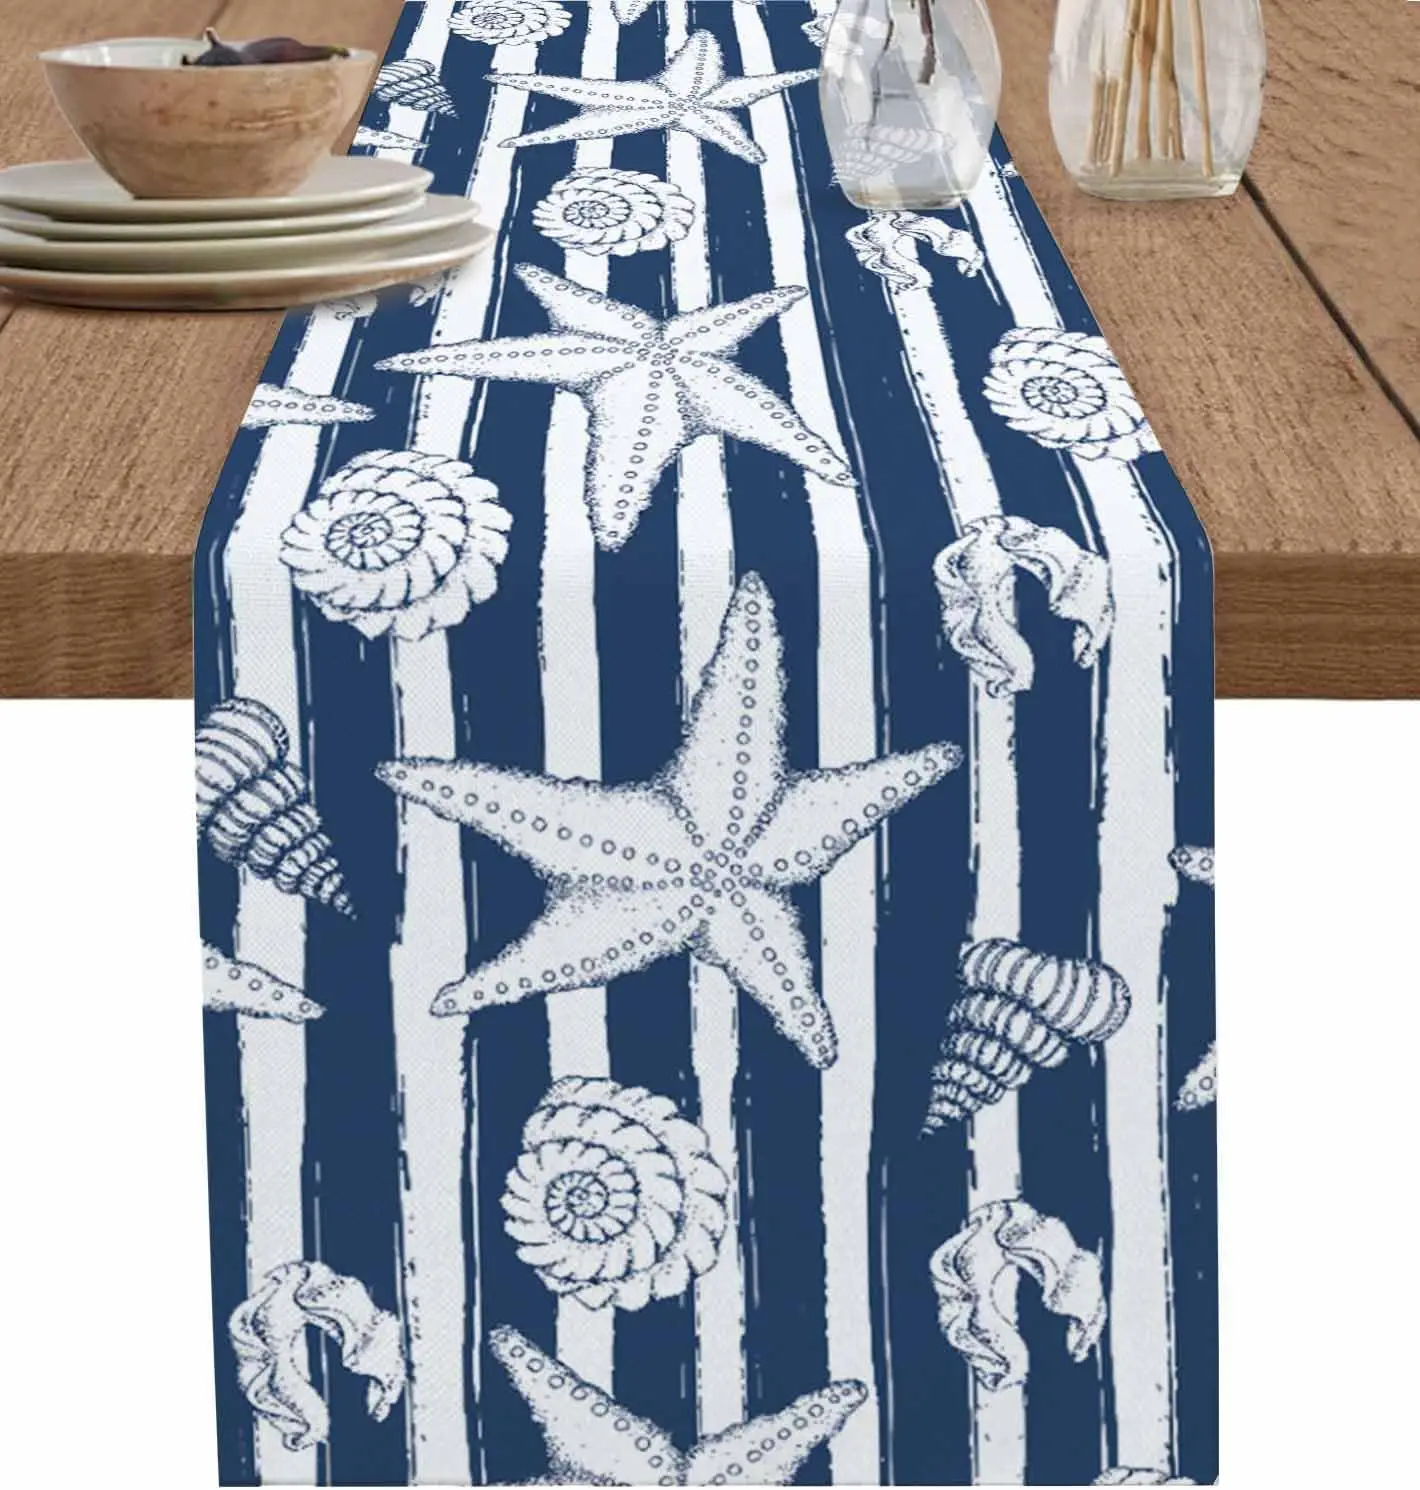 

Nautical Ocean Blue Stripes Linen Table Runners Dresser Scarf Decor Washable Beach Conch Starfish Shell Table Runner Party Decor